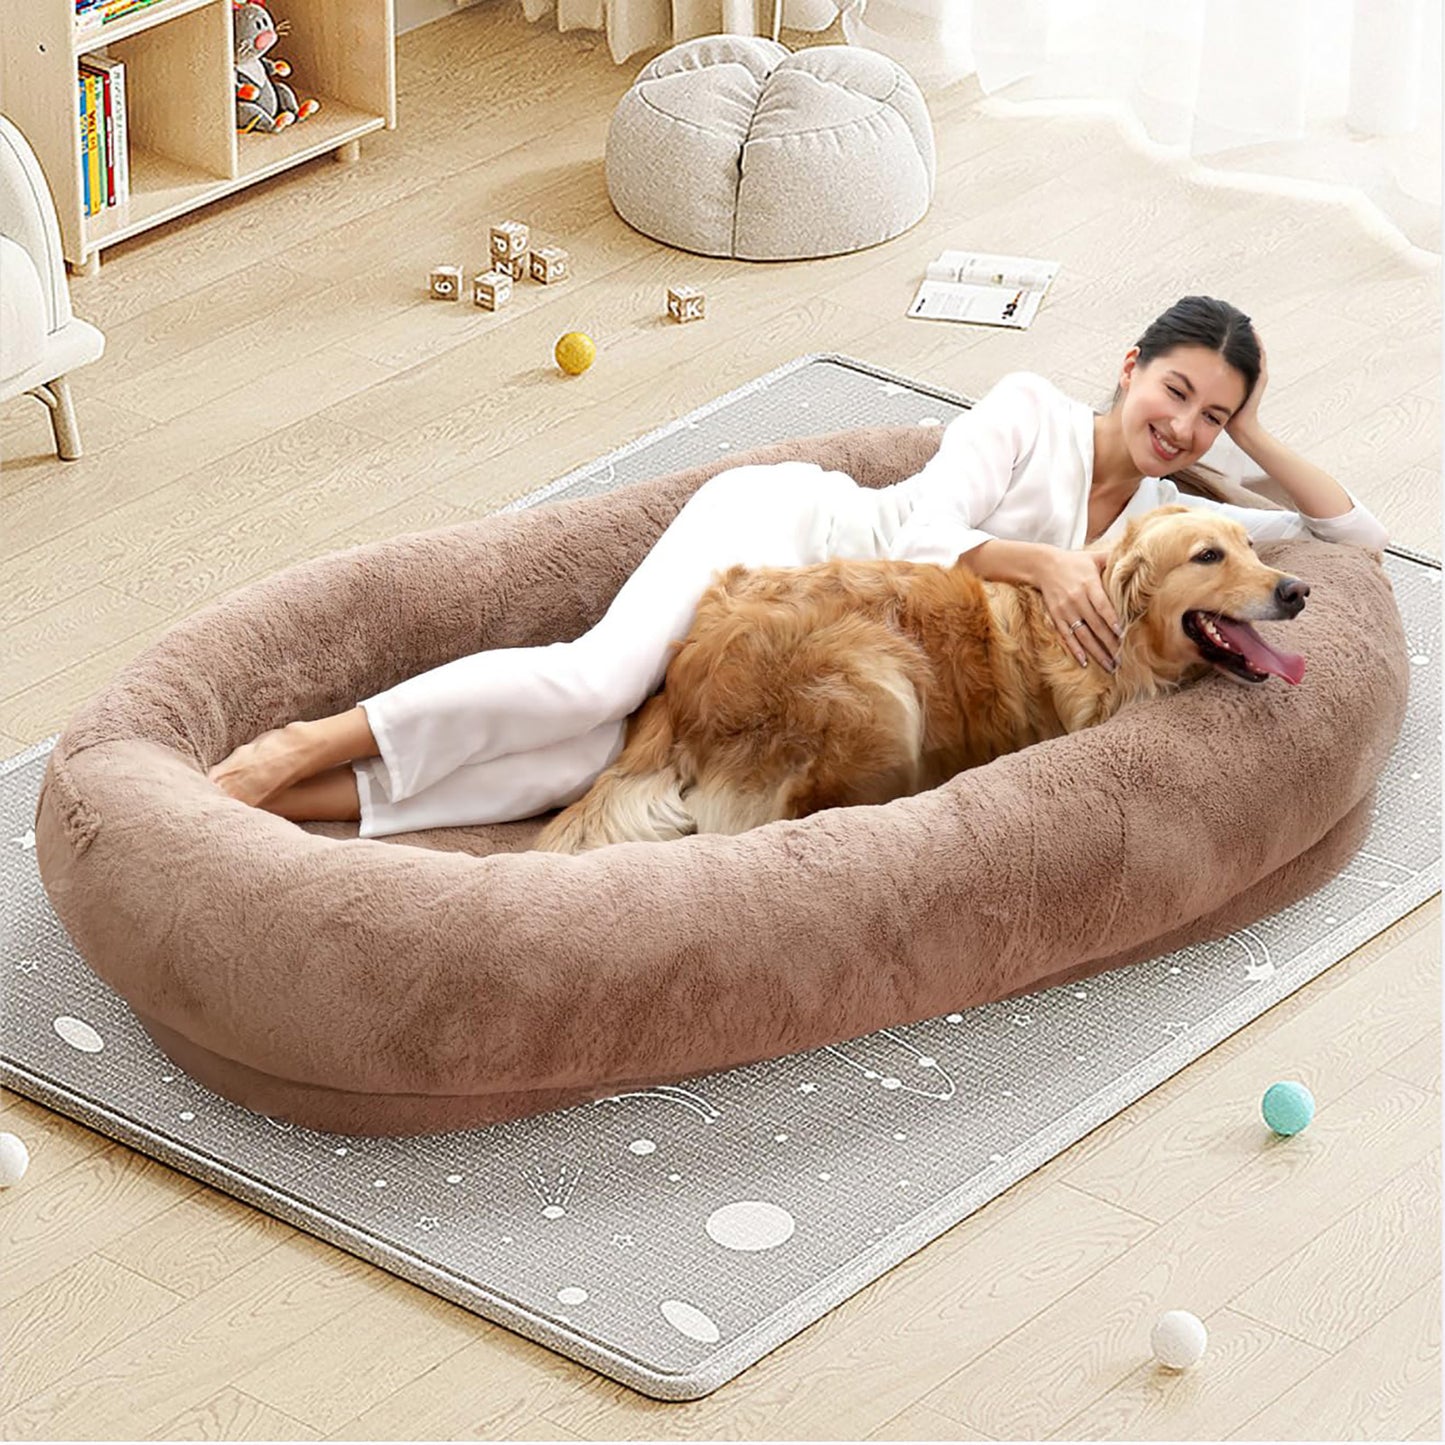 Dog Beds For Humans Size Fits You And Pets Washable